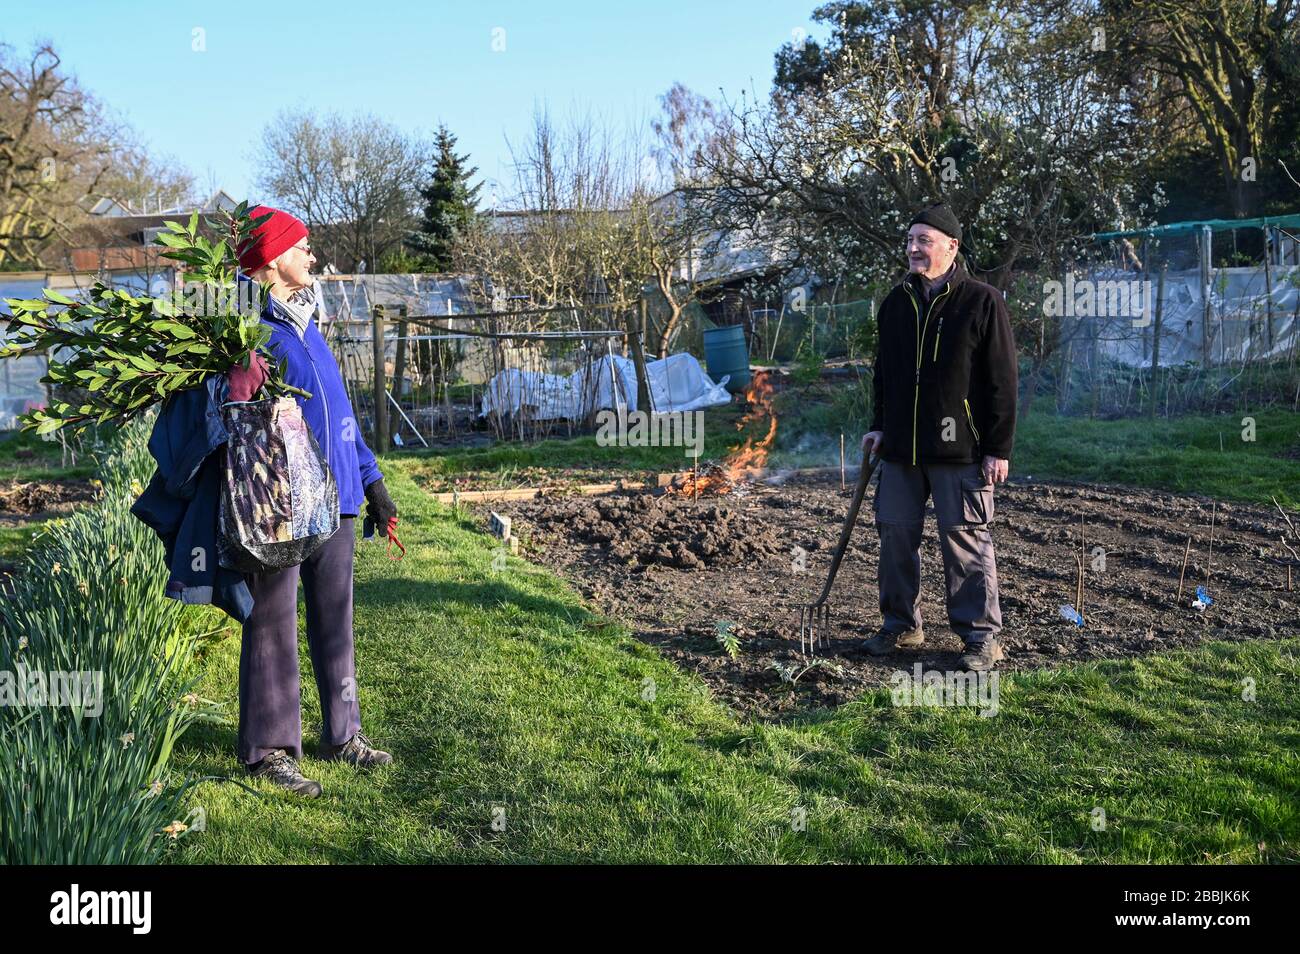 Observing social distancing as one allotment gardener greets another in passing at an allotment garden in London. Stock Photo